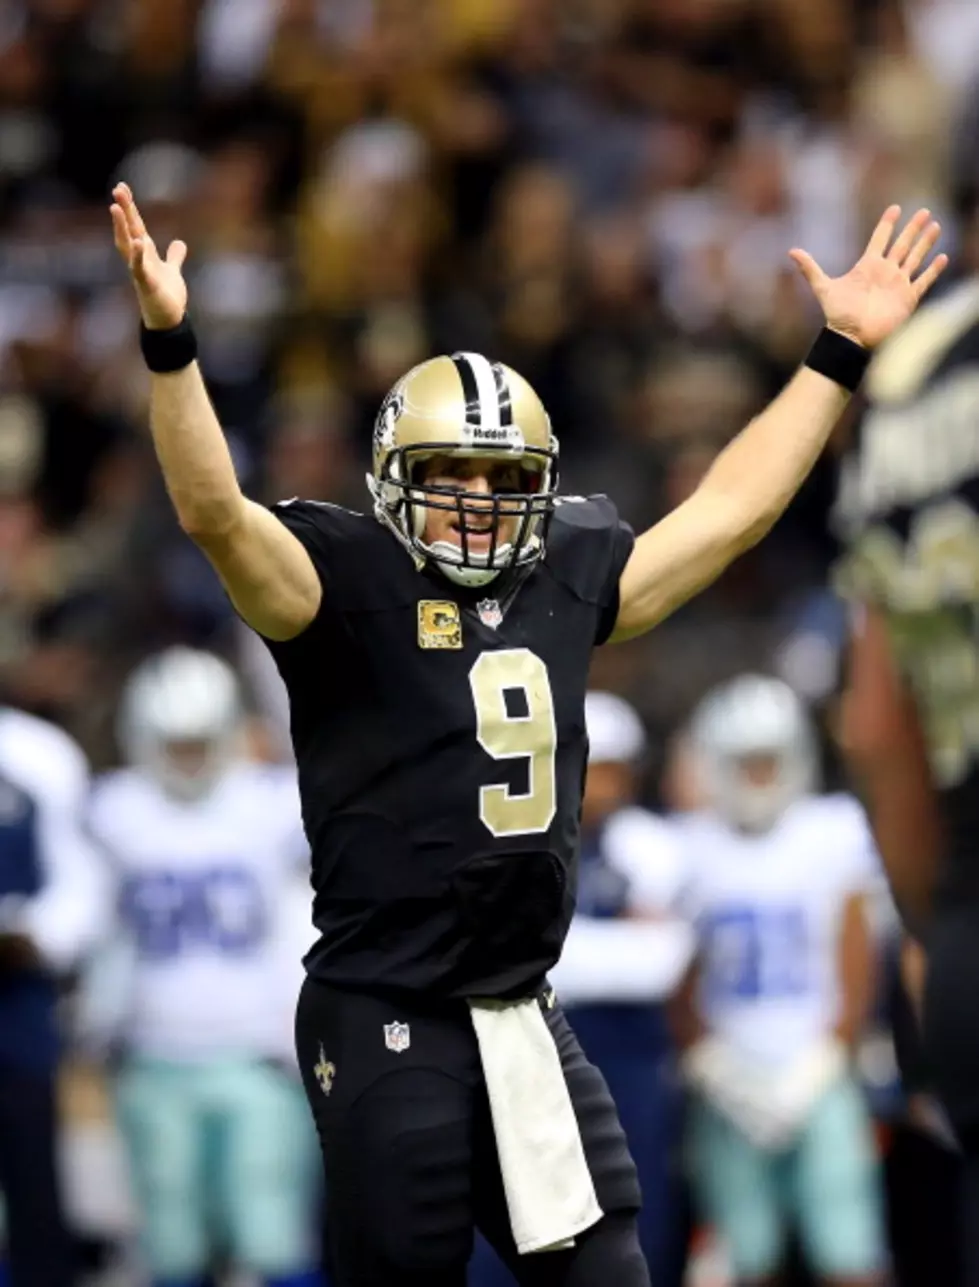 So, Just How Good IS Drew Brees? Check Out This List Of Records He Holds Or Has Broken